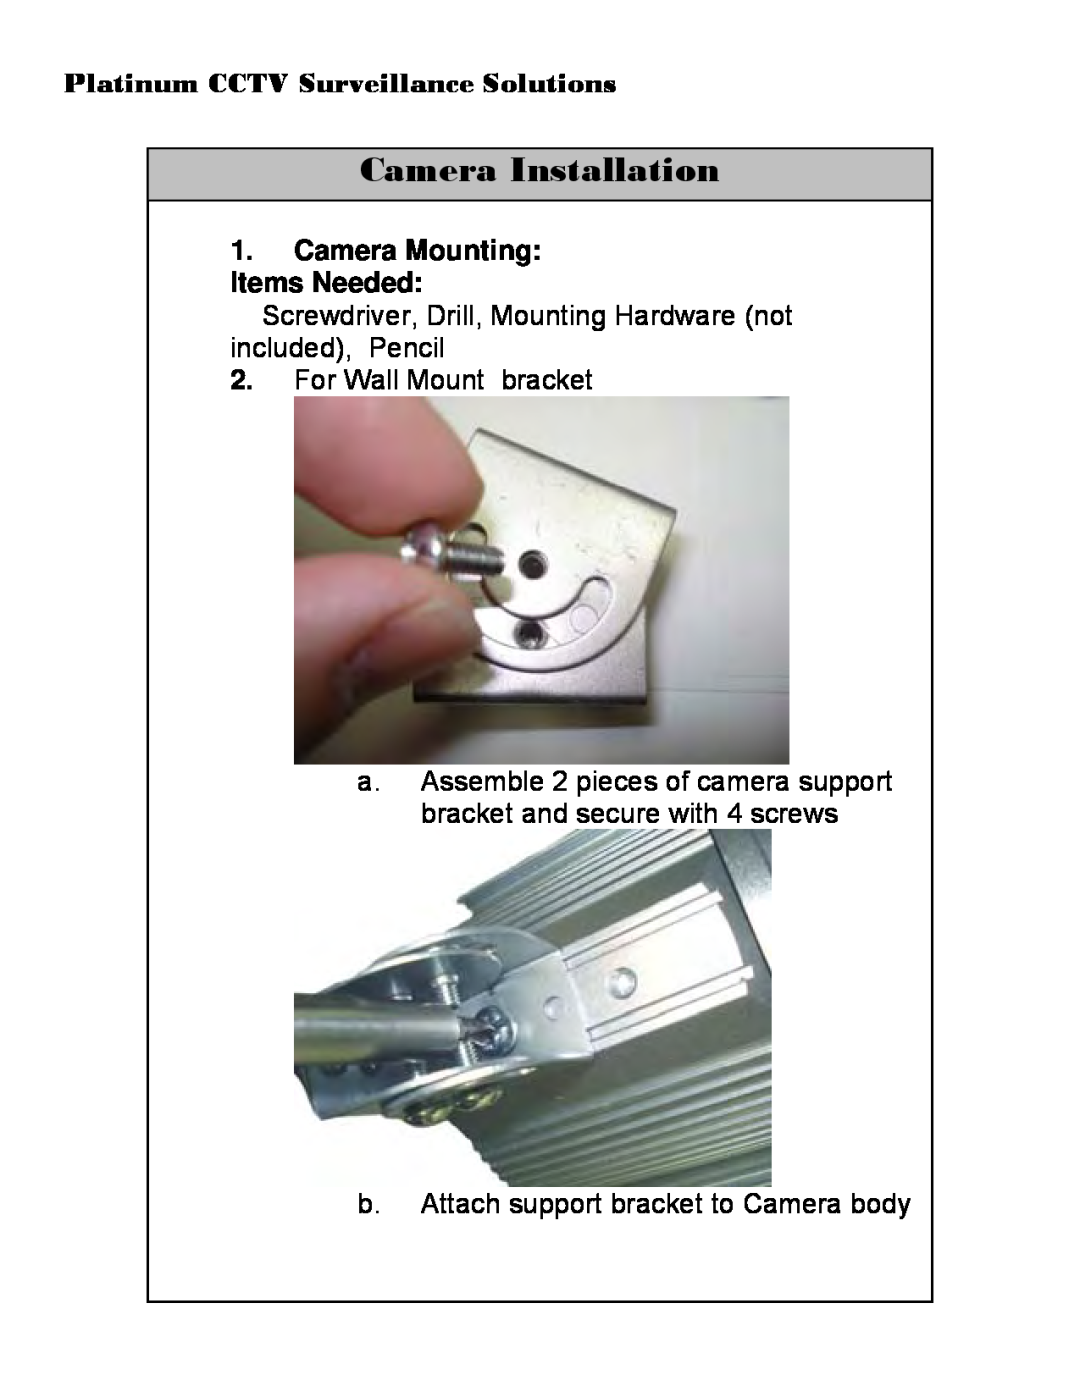 Sony CD-9255 Camera Installation, Screwdriver, Drill, Mounting Hardware not included, Pencil, For Wall Mount bracket 